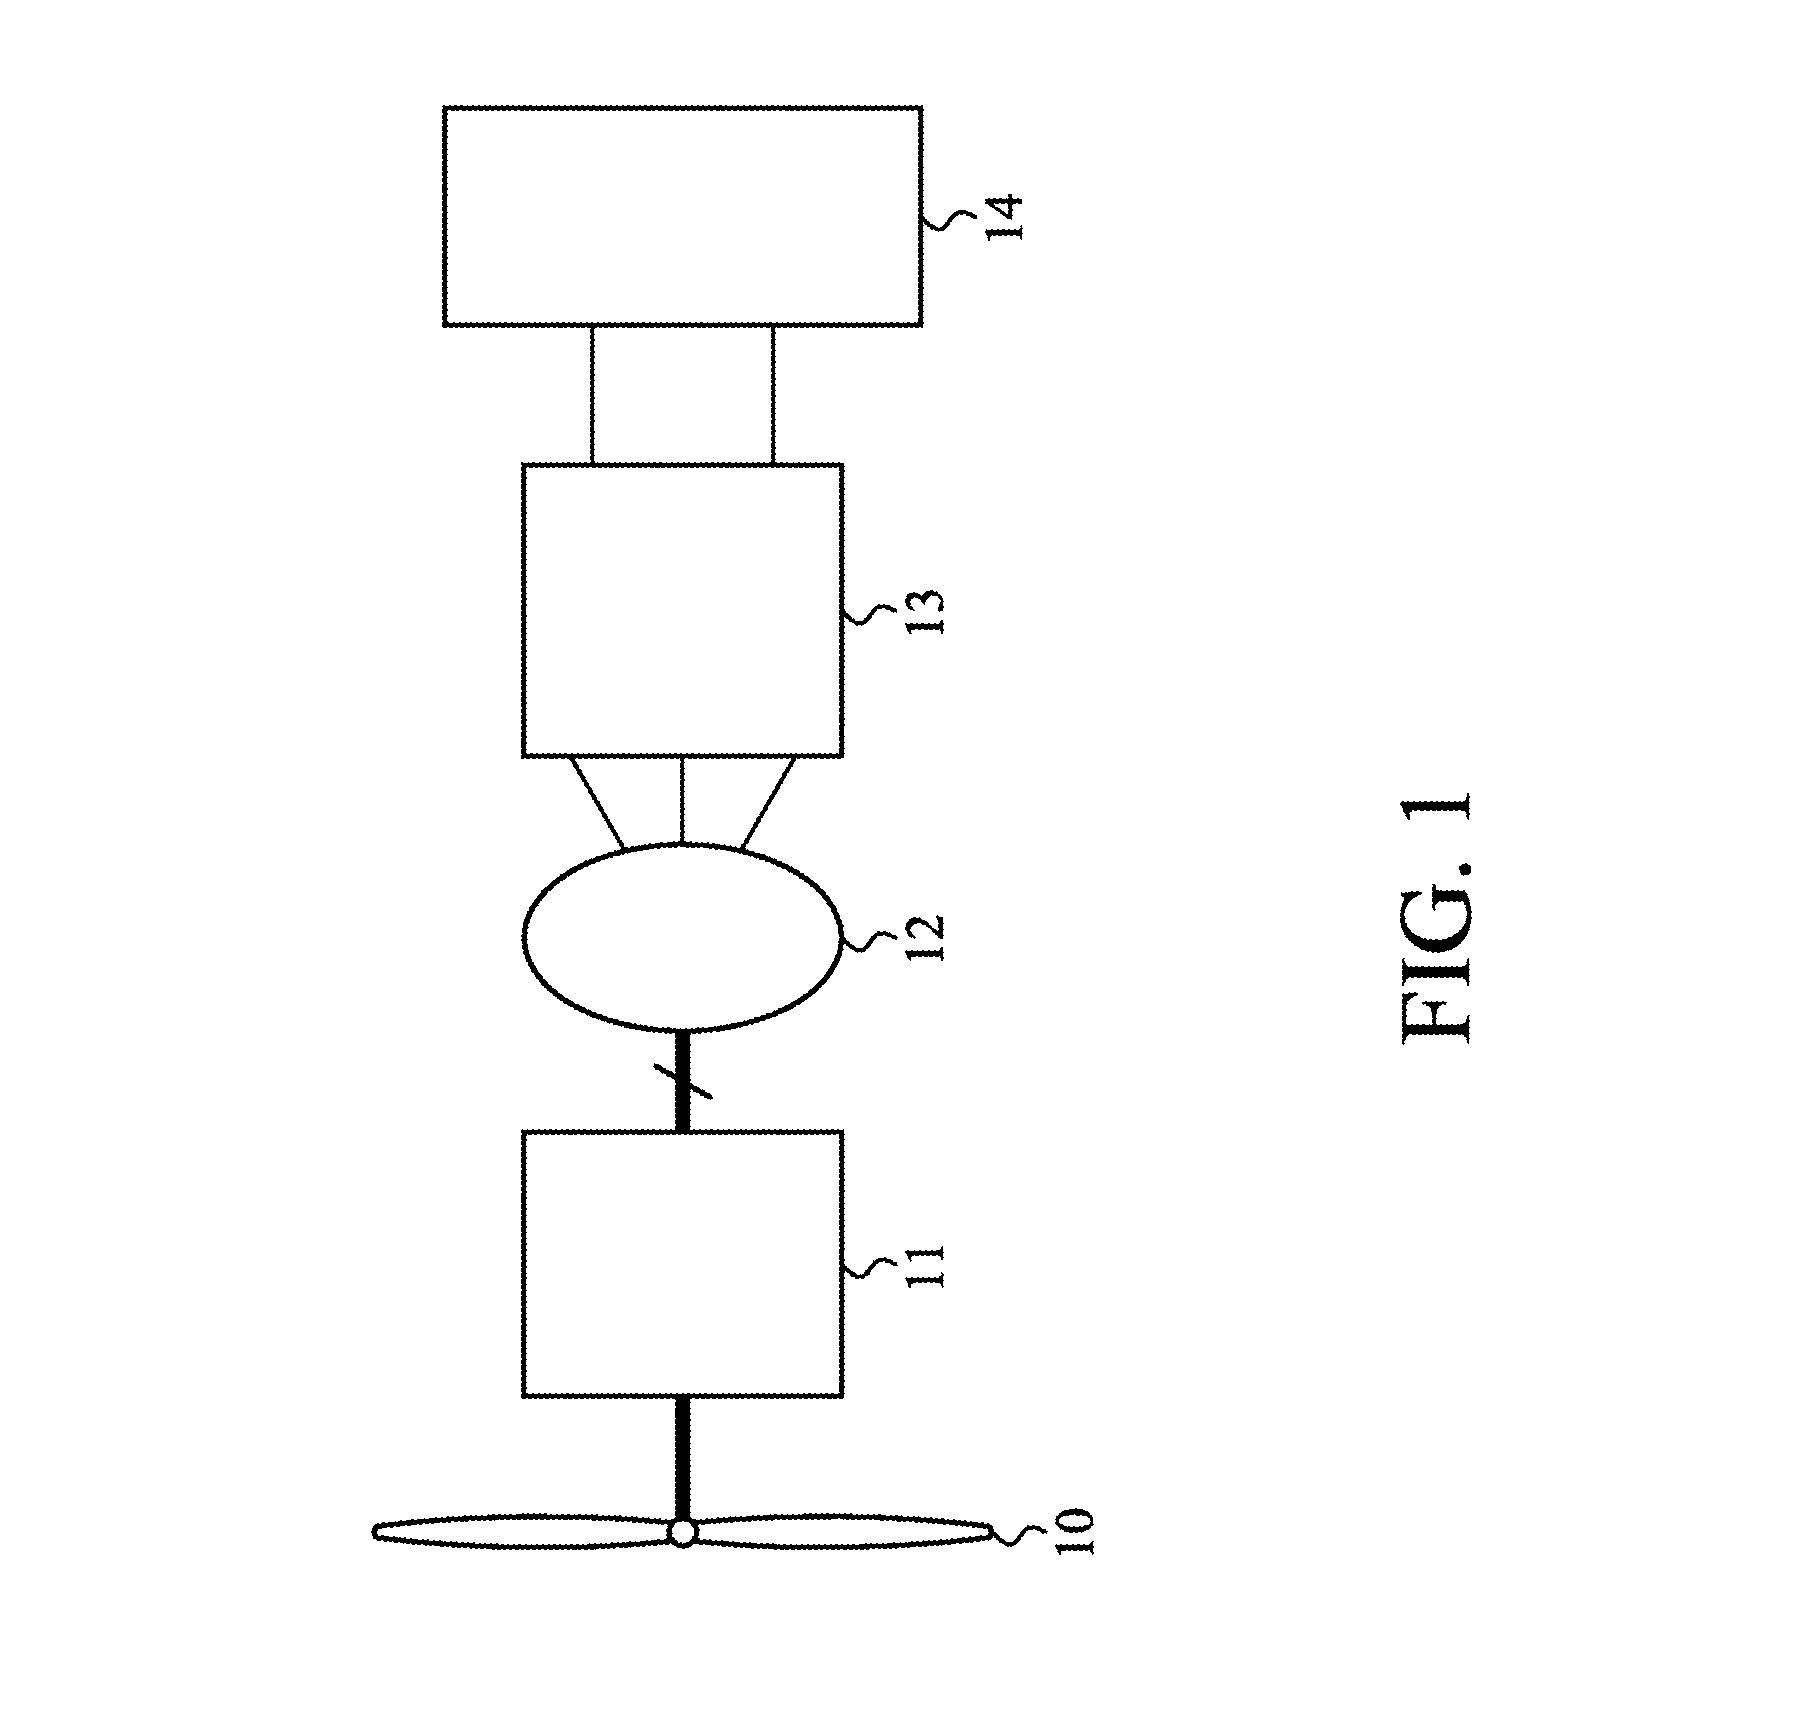 Hybrid intelligent control method and system for power generating apparatuses